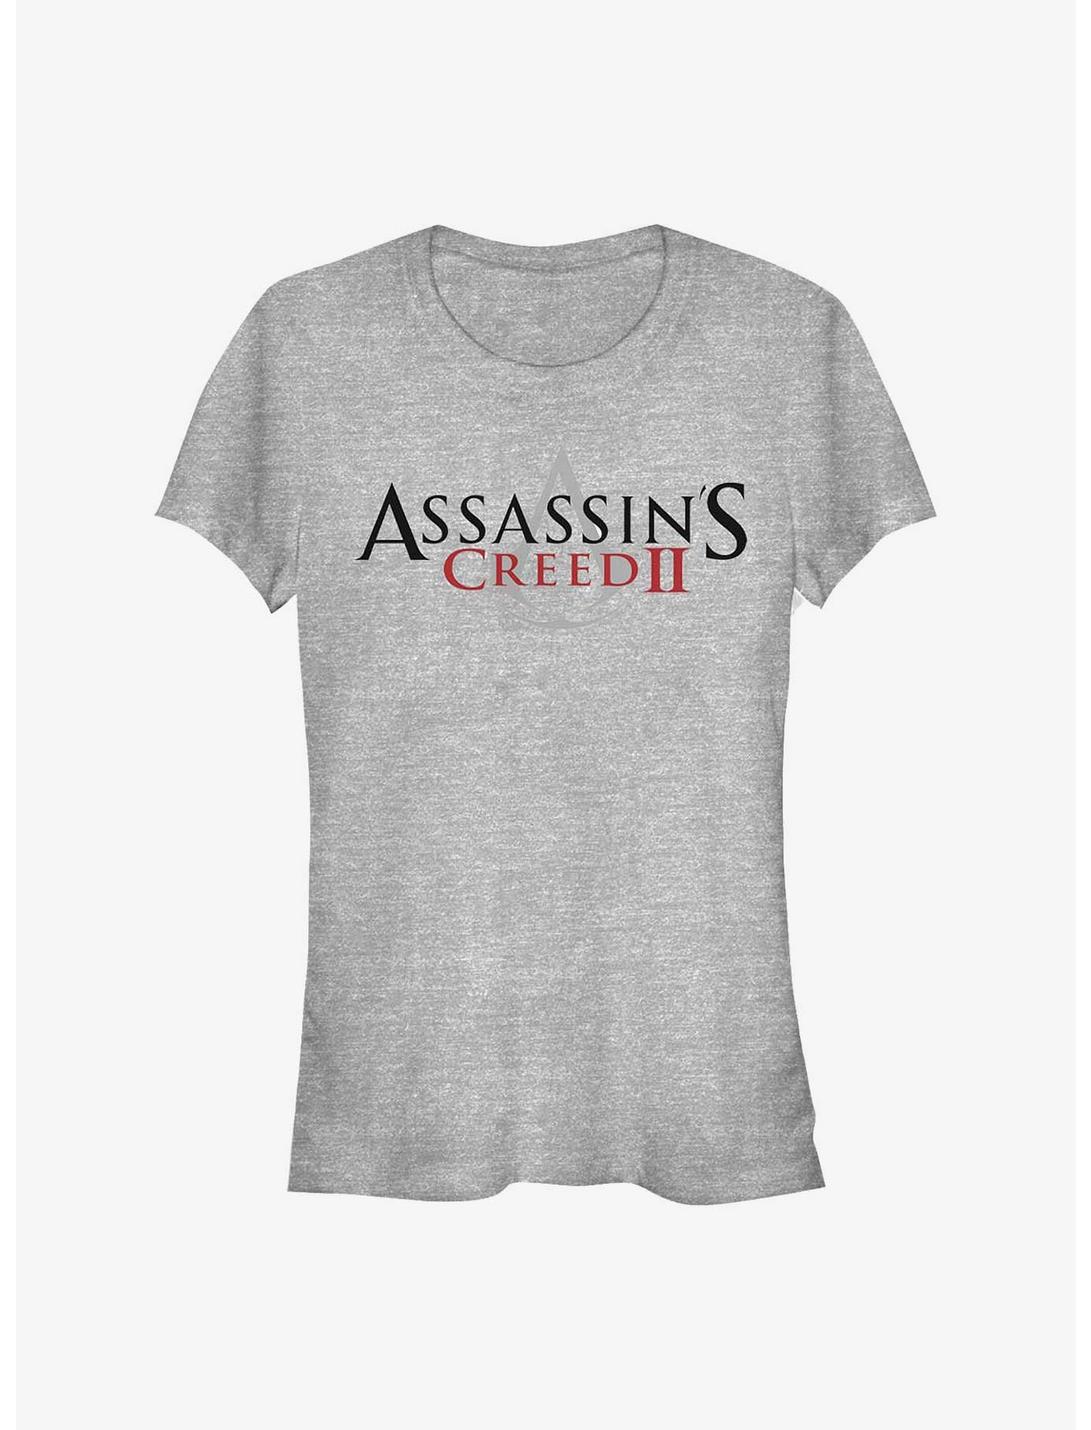 Assassin's Creed The Creed 2 Girls T-Shirt, ATH HTR, hi-res